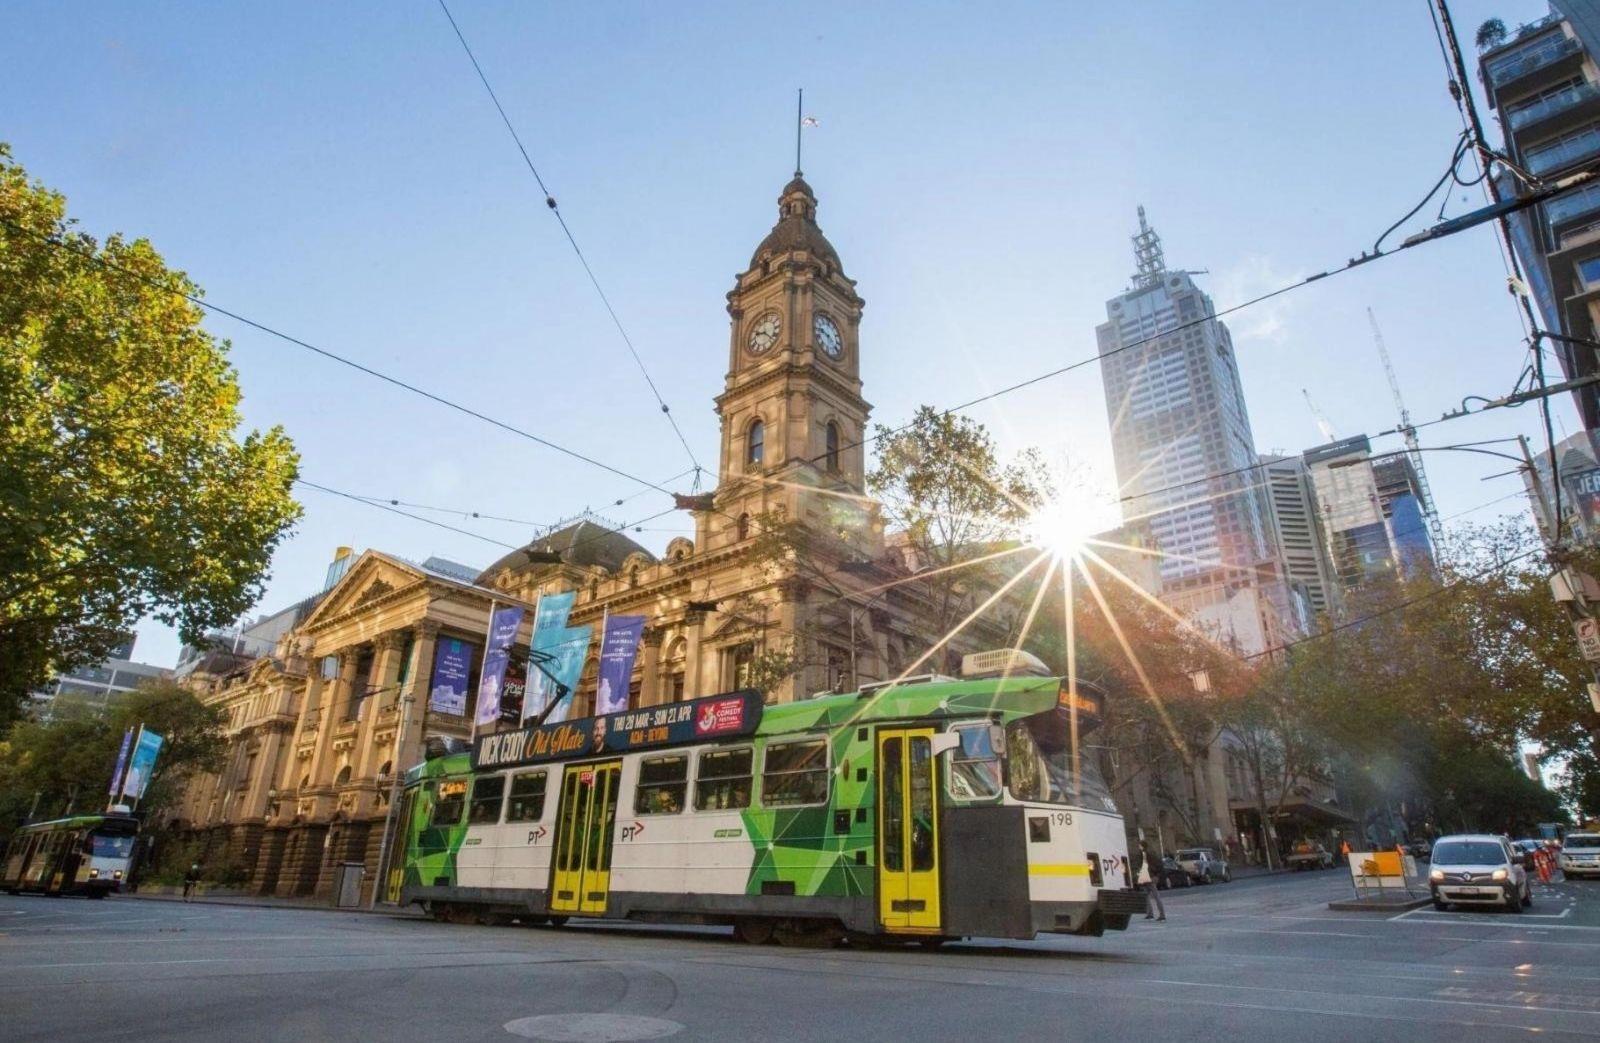 A Melbourne city scene including a tram illustrates a report on the Melbourne house and apartment in 2023.

